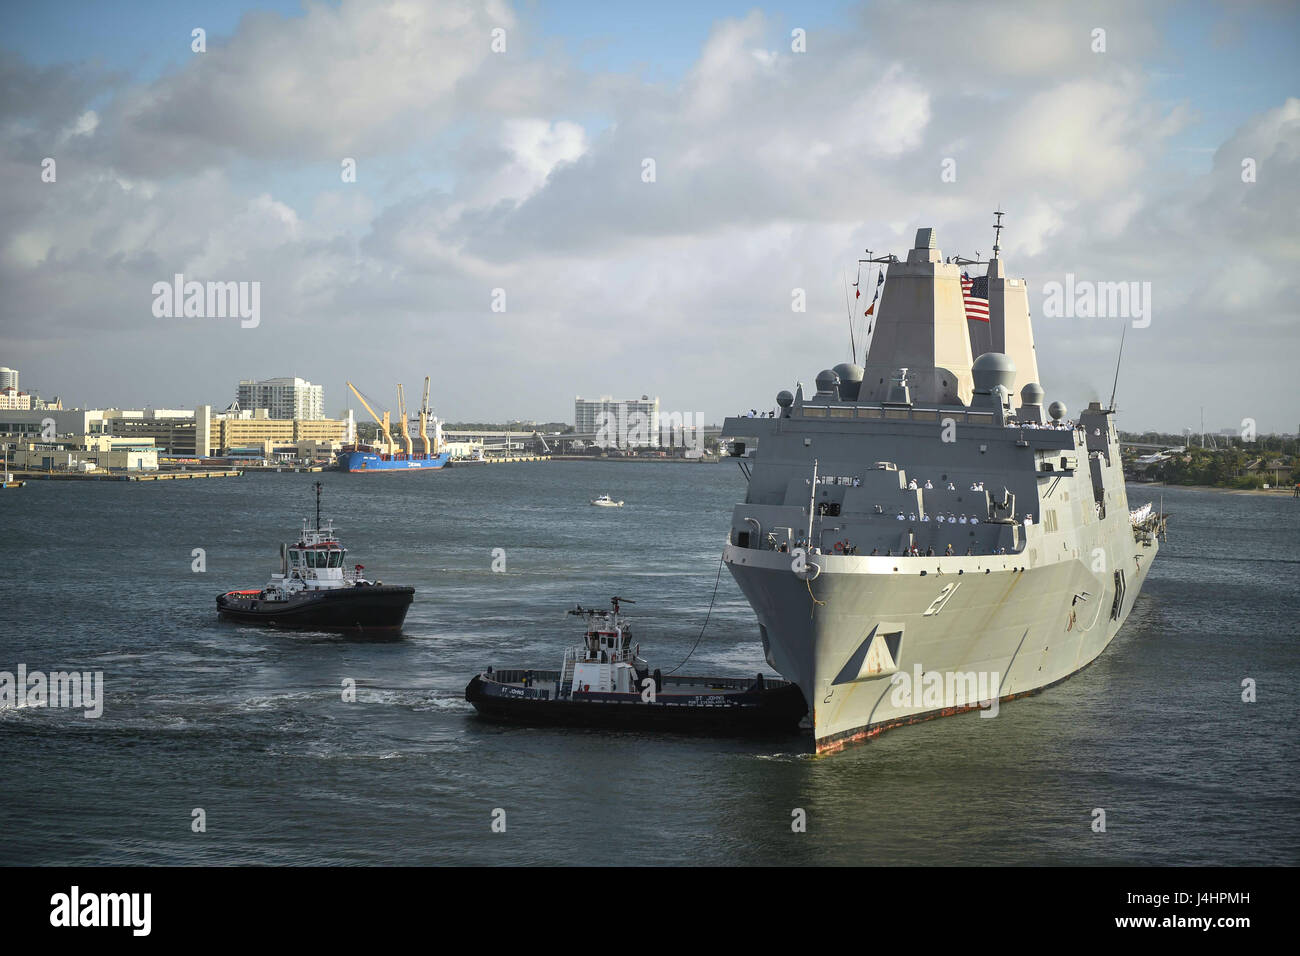 The USN San Antonio-class amphibious transport dock ship USS New York arrives at the Port Everglades Cruise Port May 1, 2017 in Fort Lauderdale, Florida.     (photo by Ernest R. Scott /US Navy  via Planetpix) Stock Photo